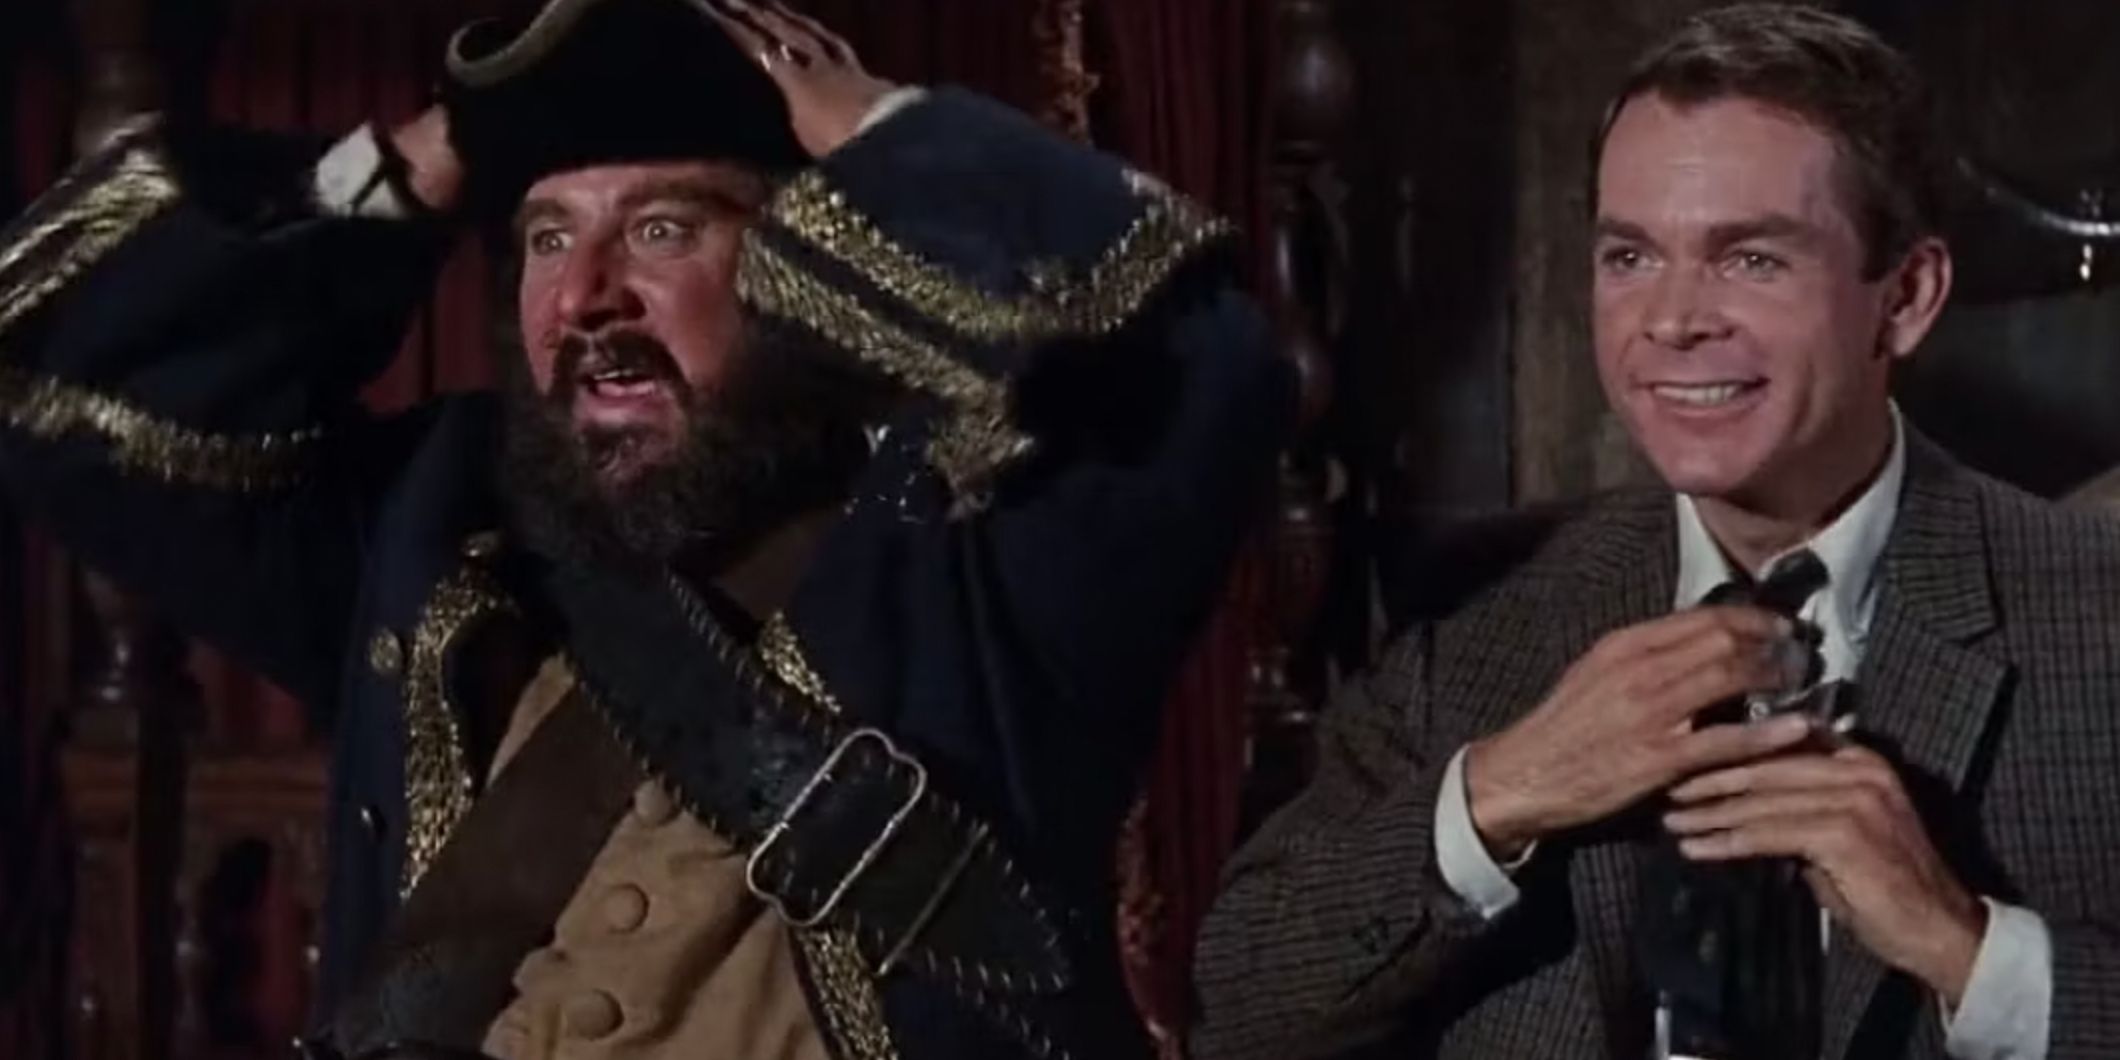 The ghost of Blackbeard next to a man in a suit in 1968 movie Blackbeards Ghost